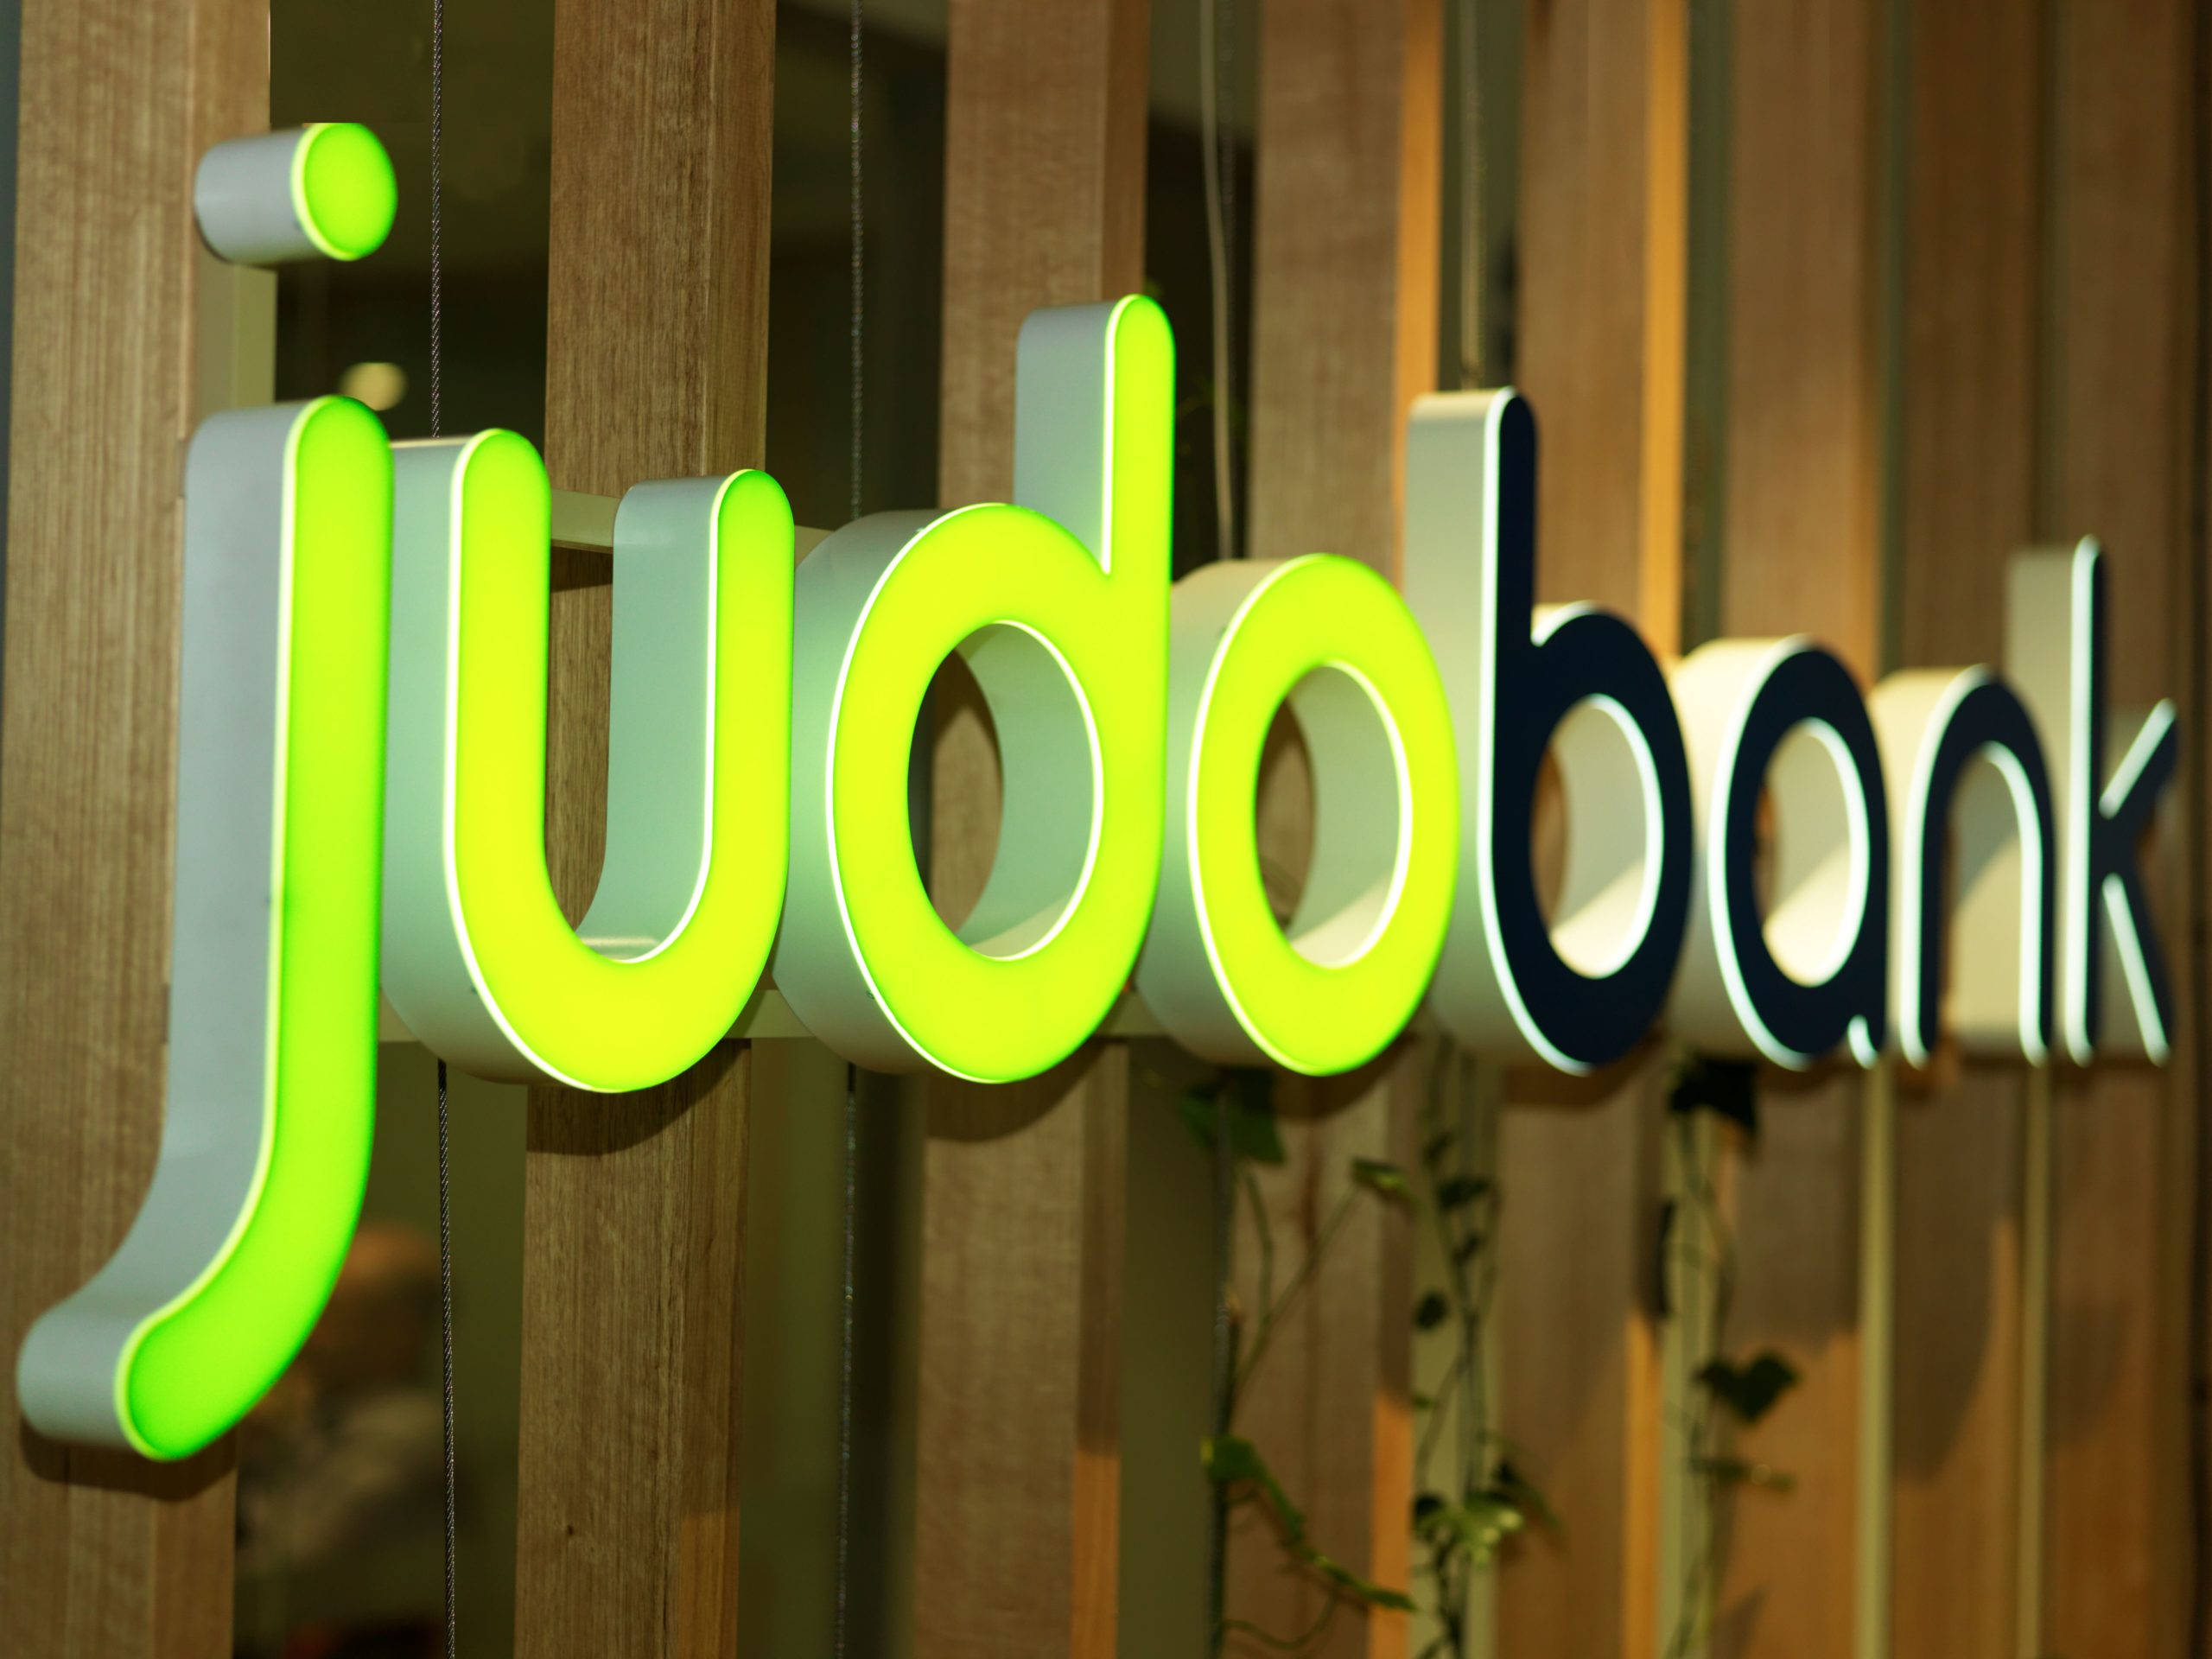 judo bank achieves business continuity with cloud technology strategy – microsoft australia news centre